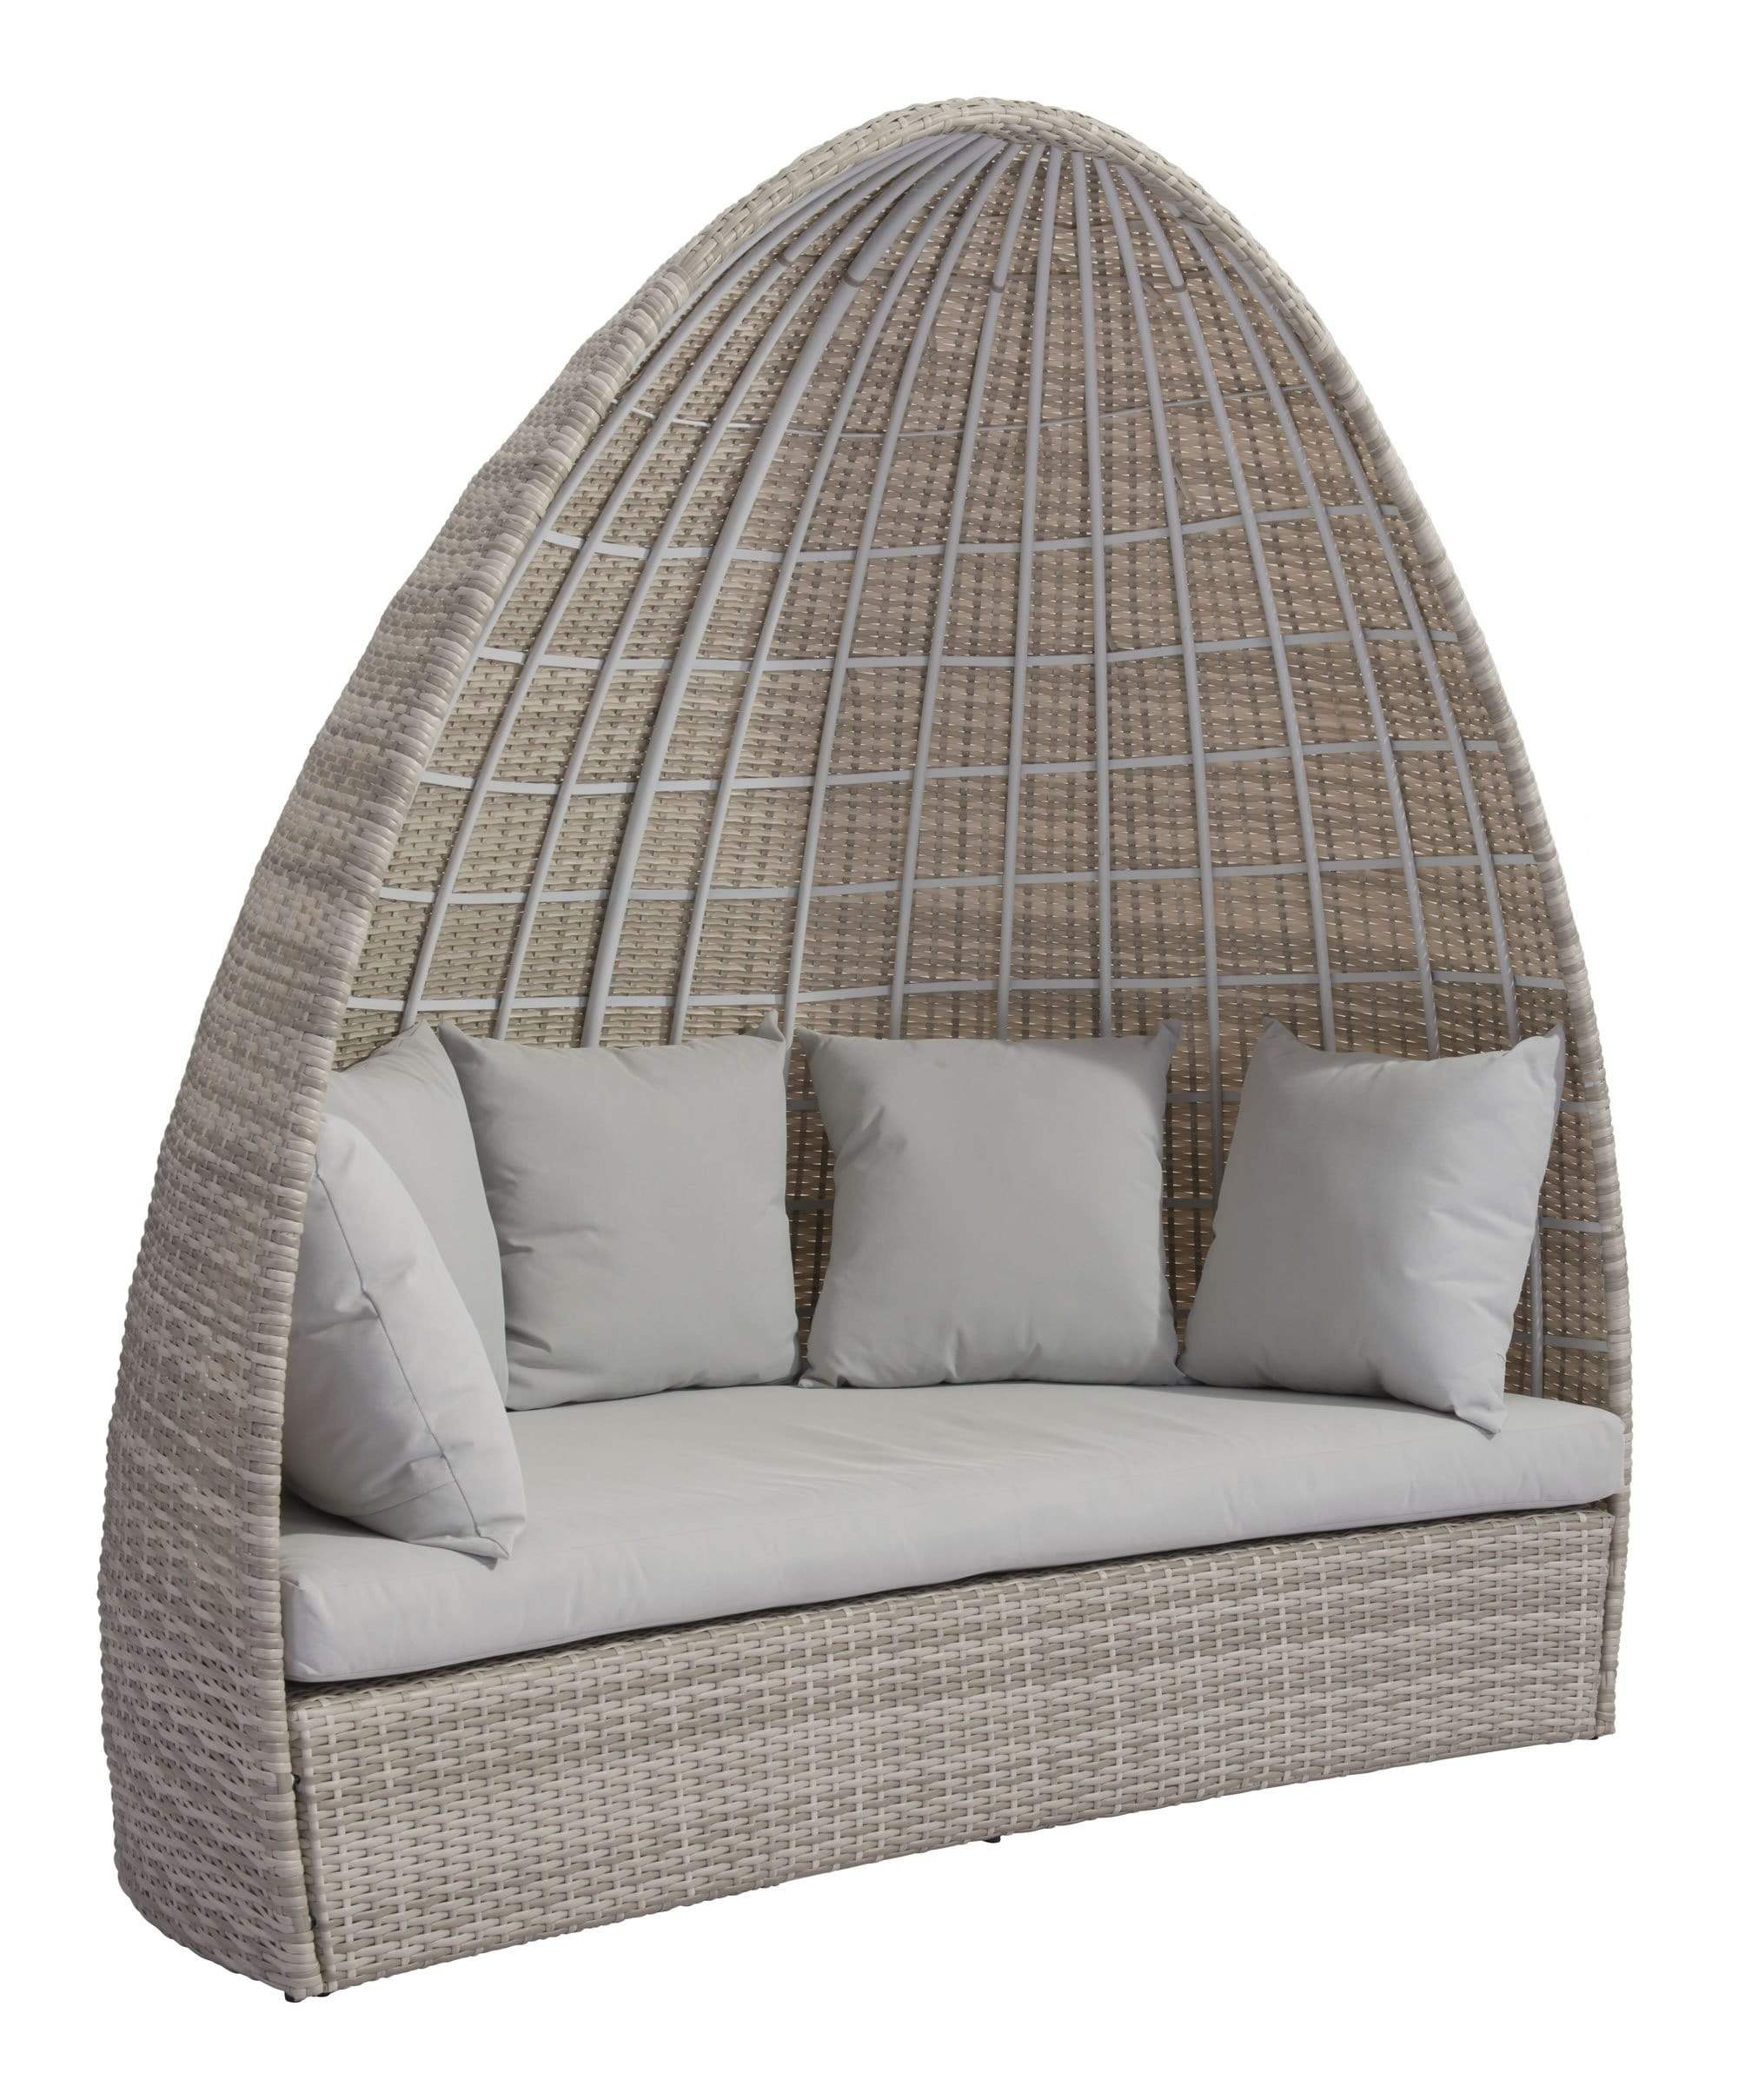 HomeRoots Outdoors Day Bed White & Gray / Sunproof Fabric, Synthetic Weave, Aluminum 79.5" x 45.7" x 80.3" White & Gray, Synthetic Weave, Aluminum, Daybed